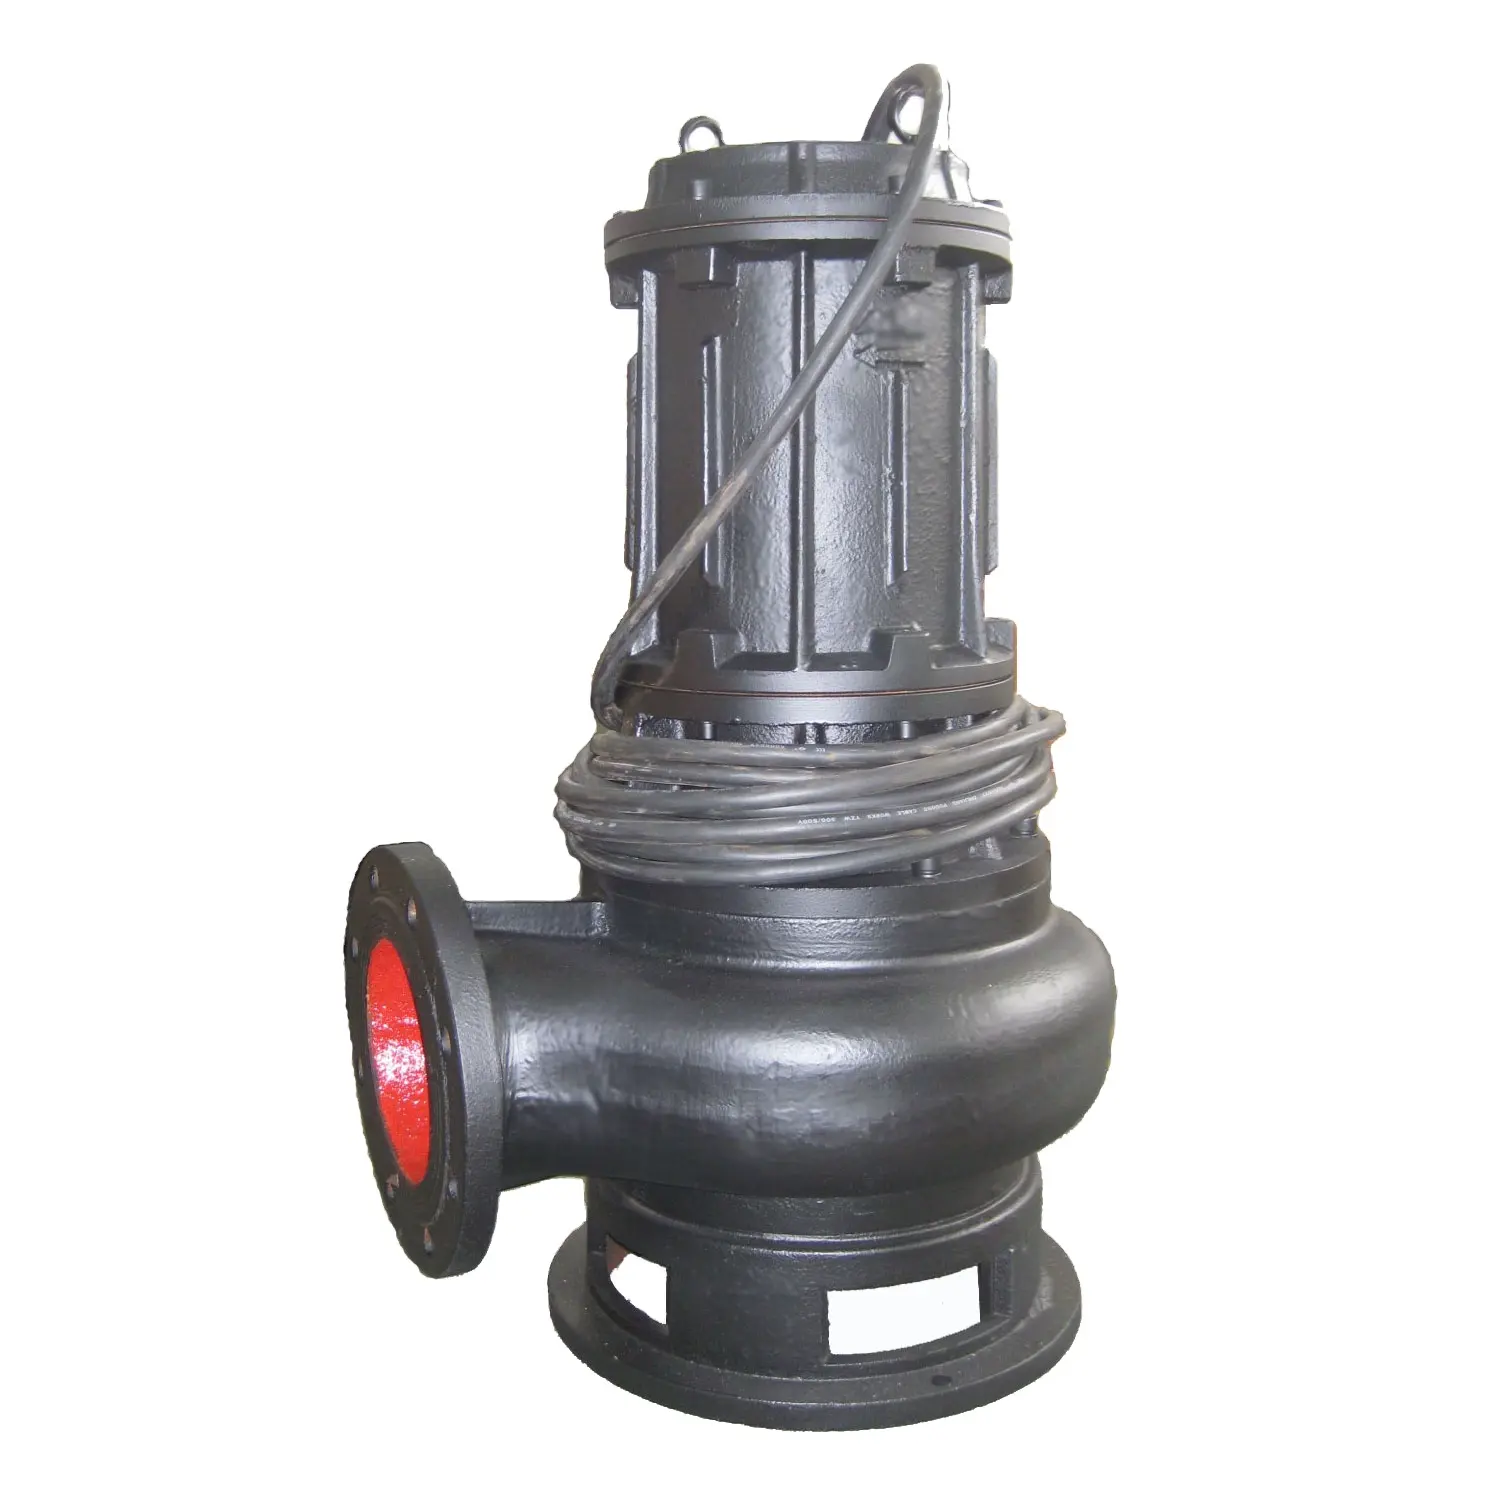 Hot Sale Non Self-priming Submersible Sewage Waste Water Pump with Electric Motor